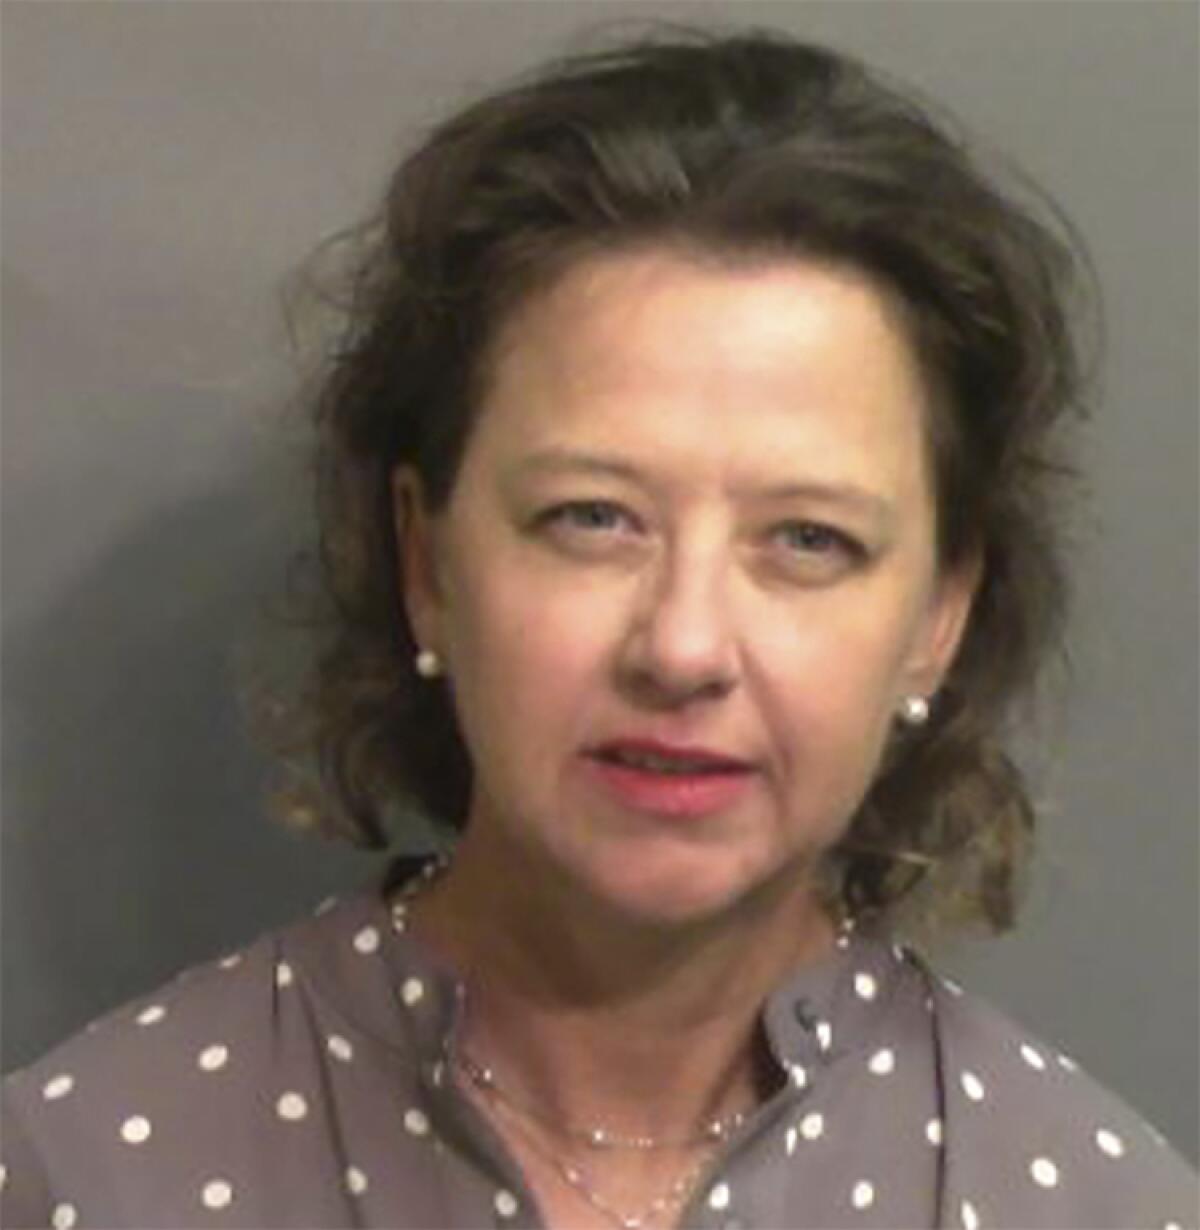 This jail booking photo provided by Glynn County Sheriff’s Office, shows Jackie Johnson, the former district attorney for Georgia’s Brunswick Judicial Circuit, after she turned herself in to the Glynn County jail in Brunswick, Ga, on Wednesday, Sept. 8, 2021. A grand jury indicted Johnson on charges of violating her oath of office and obstructing police in her handling of the February 2020 killing of Ahmaud Arbery. The indictment accuses Johnson of using her position to try to shield Arbery’s killers from prosecution. She has denied any wrongdoing. (Glynn County Sheriff’s Office via AP)